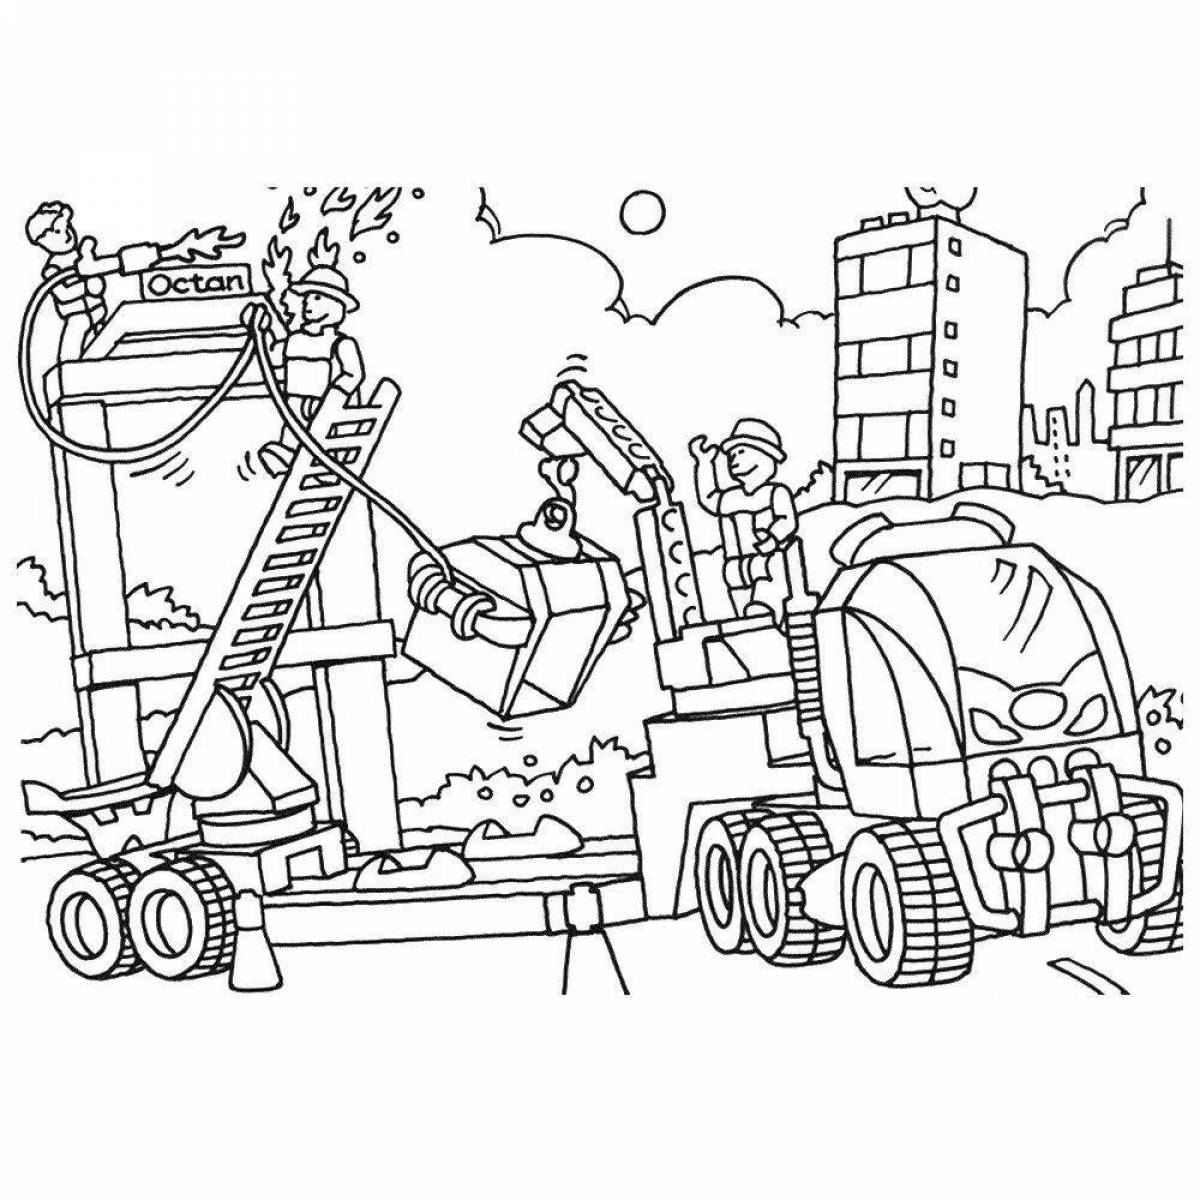 Playful house building coloring page